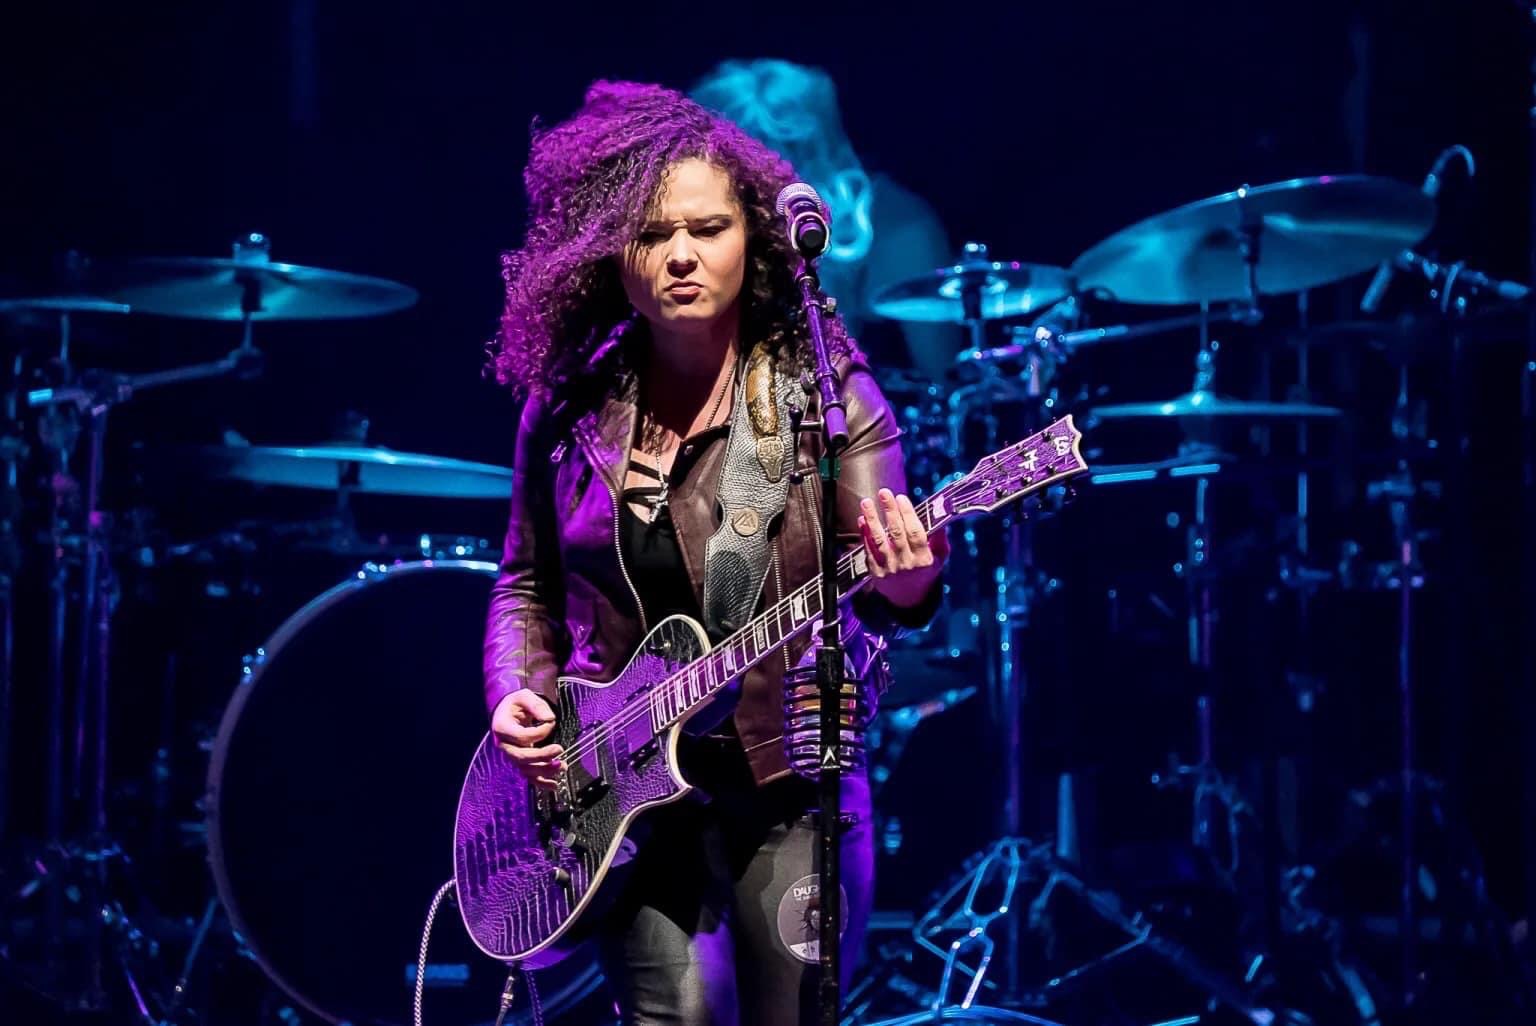 PLUSH: MORIAH FORMICA ON FINDING NEW DIRECTION WITH A ROCK ‘N’ ROLL POWERHOUSE!